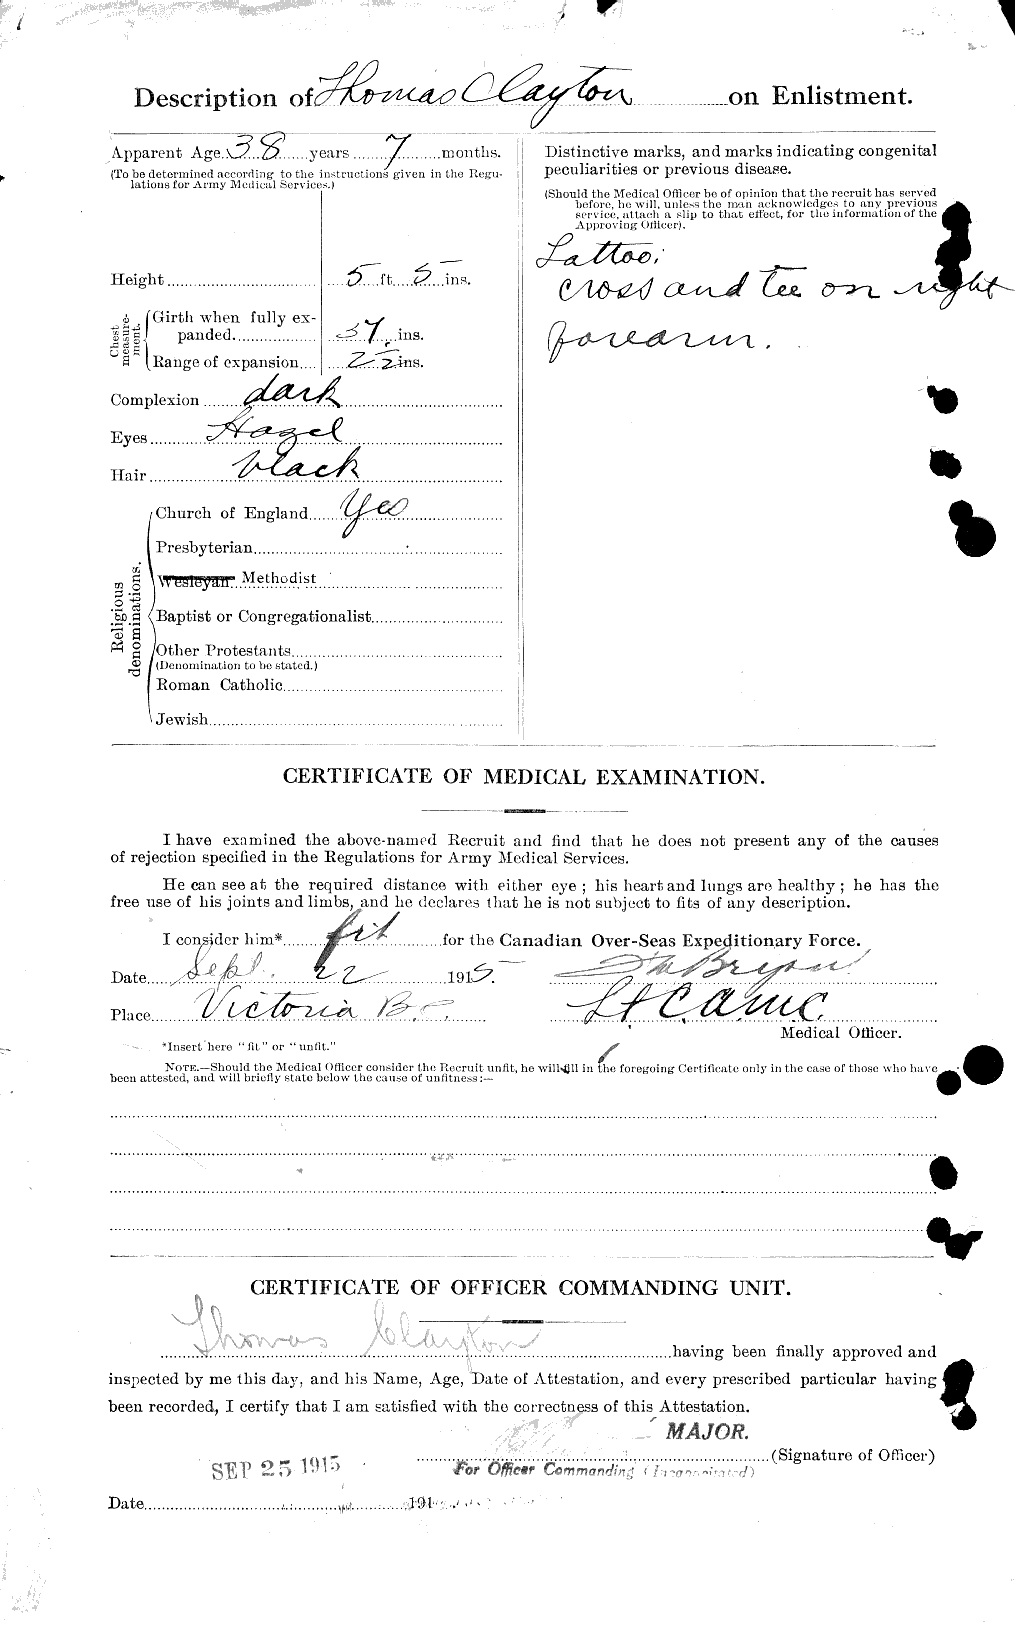 Personnel Records of the First World War - CEF 019286b